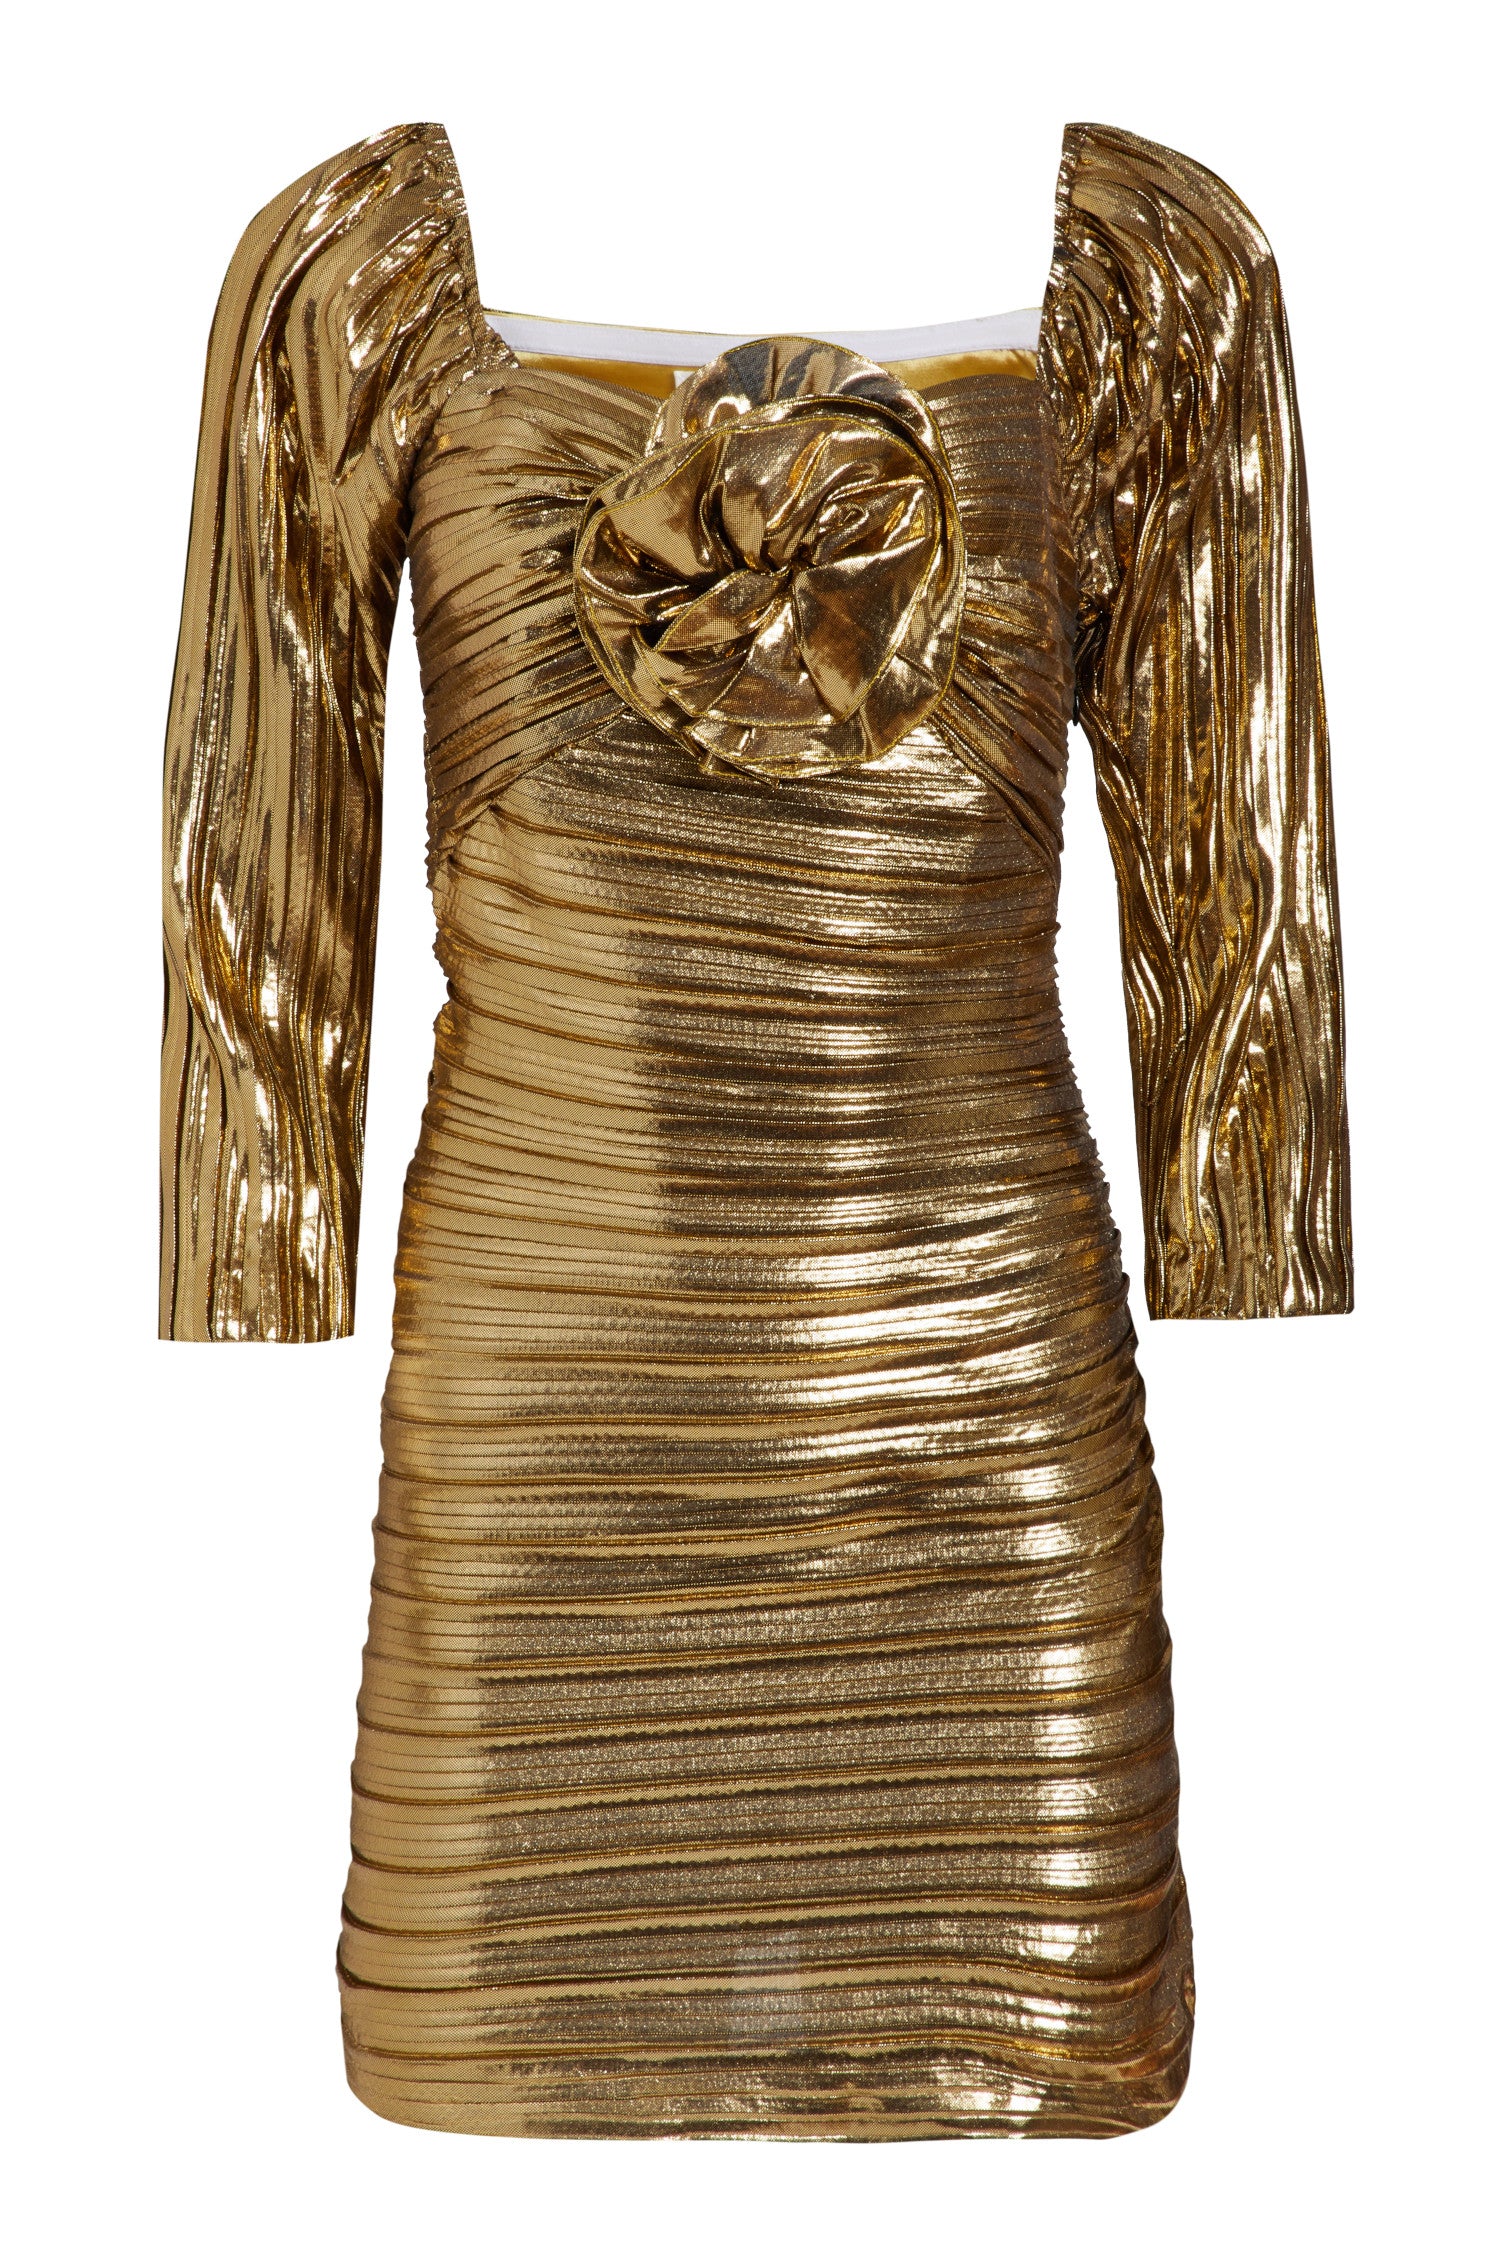 Mini gold pleated lame fabric dress with fixed, three-dimensional flower applique on the center front, elastic straps at the shoulders allowing for comfortable wear, and a lined bodice. 